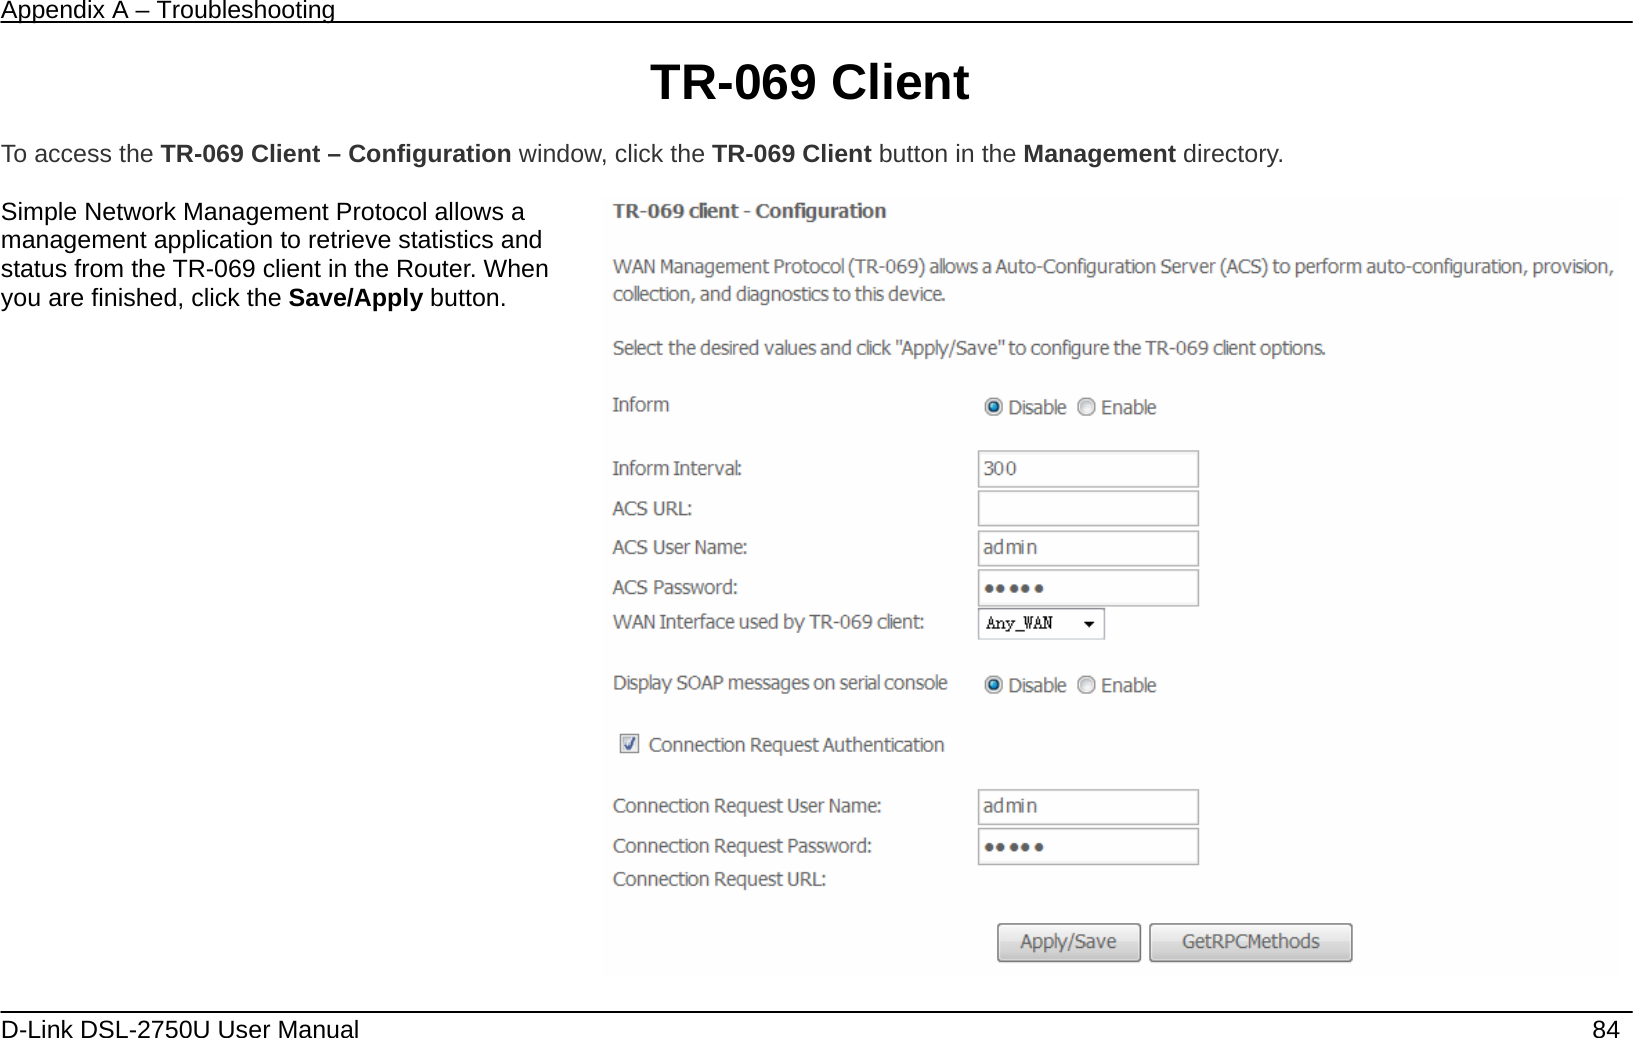 Appendix A – Troubleshooting   D-Link DSL-2750U User Manual    84 TR-069 Client  To access the TR-069 Client – Configuration window, click the TR-069 Client button in the Management directory.  Simple Network Management Protocol allows a management application to retrieve statistics and status from the TR-069 client in the Router. When you are finished, click the Save/Apply button.       